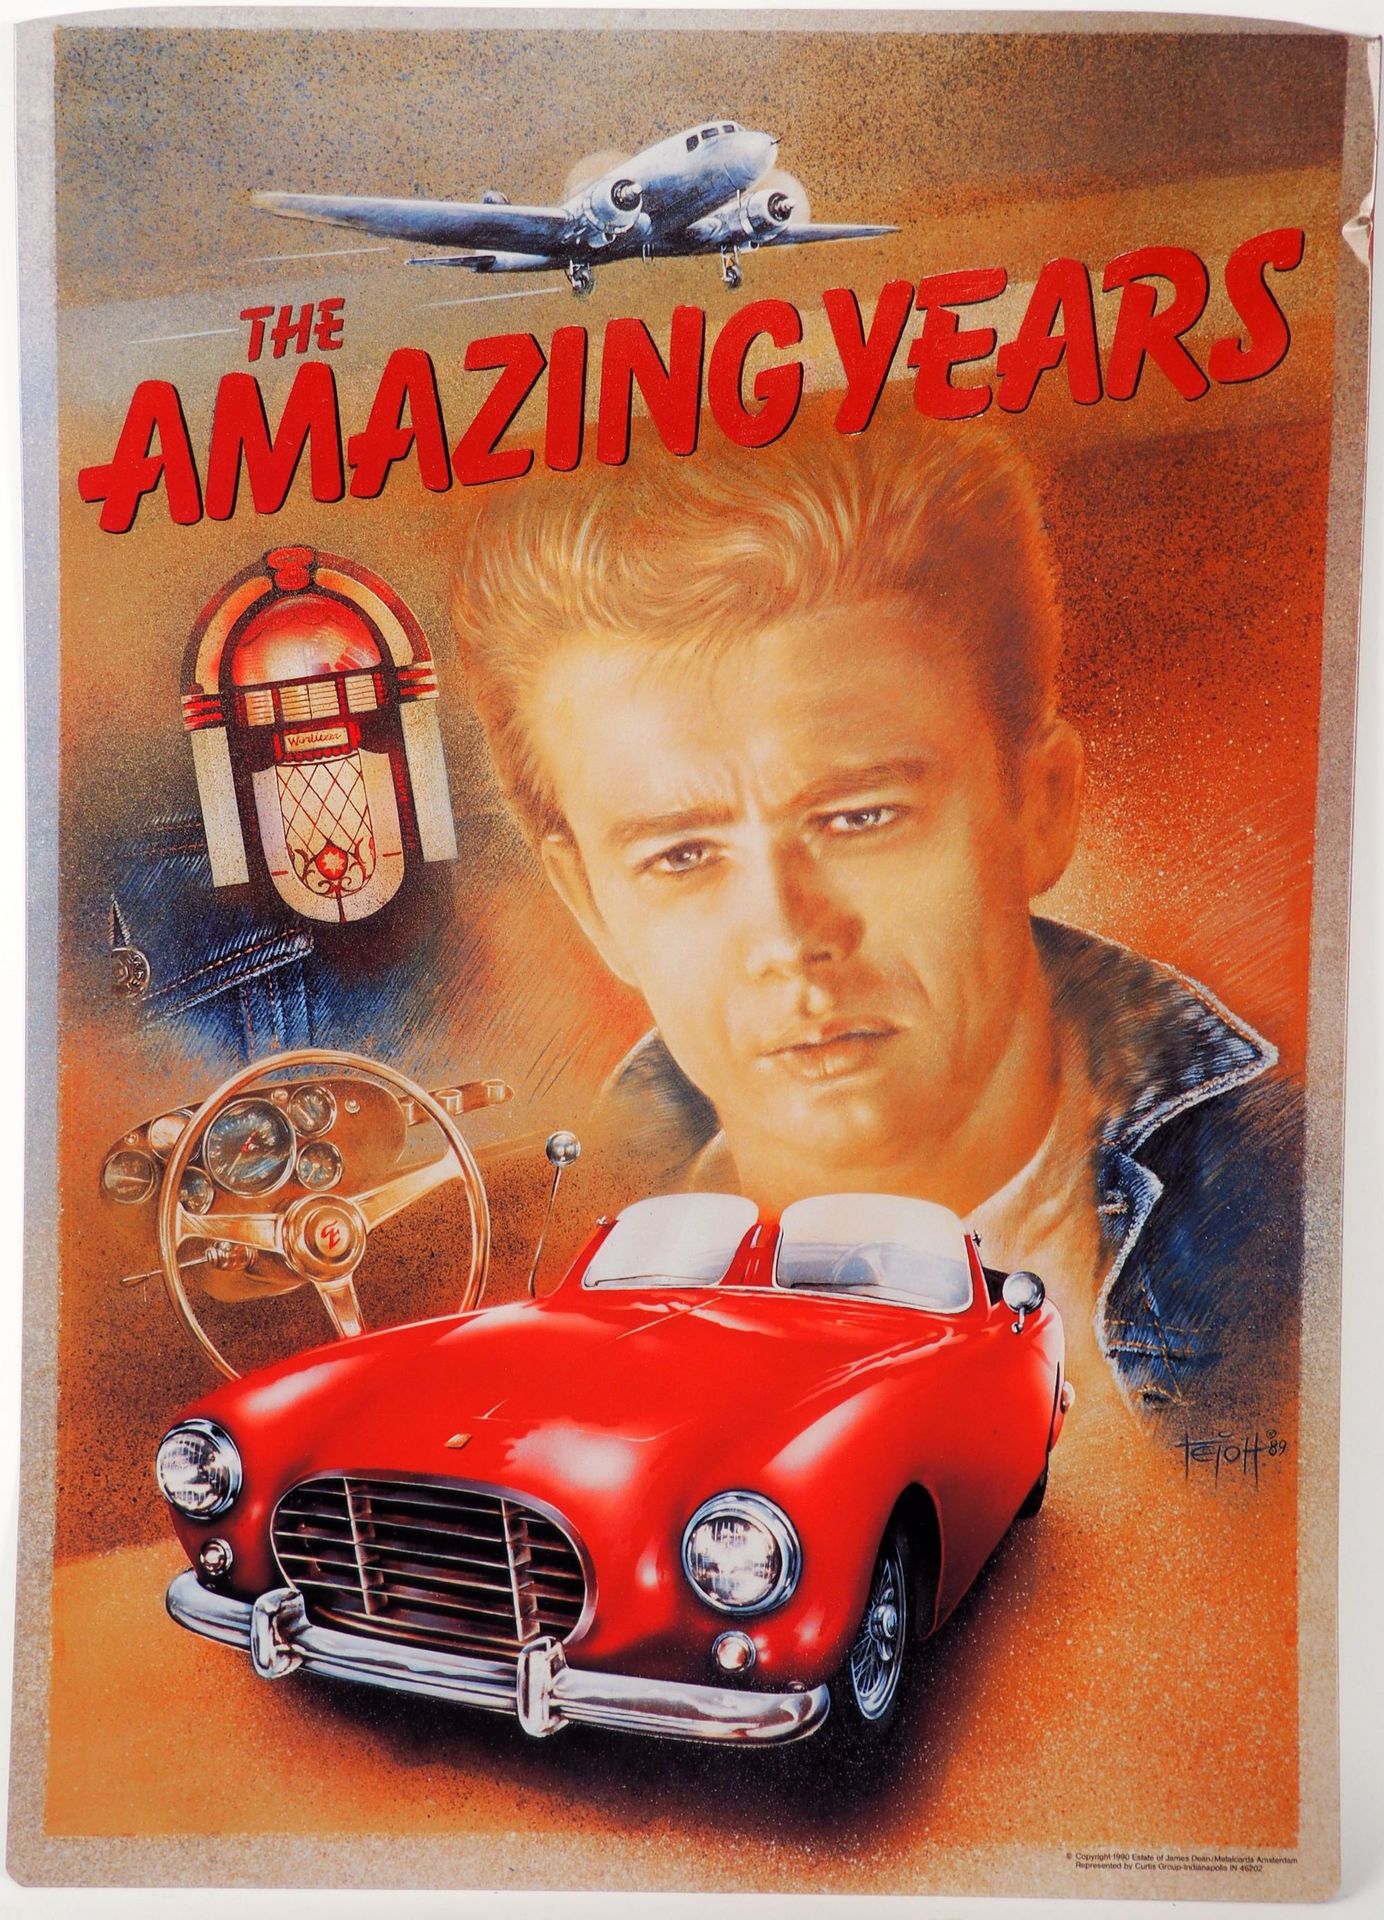 Null Enamelled plaque "The Amazing Years" with the effigy of James Dean, 1990
77&hellip;